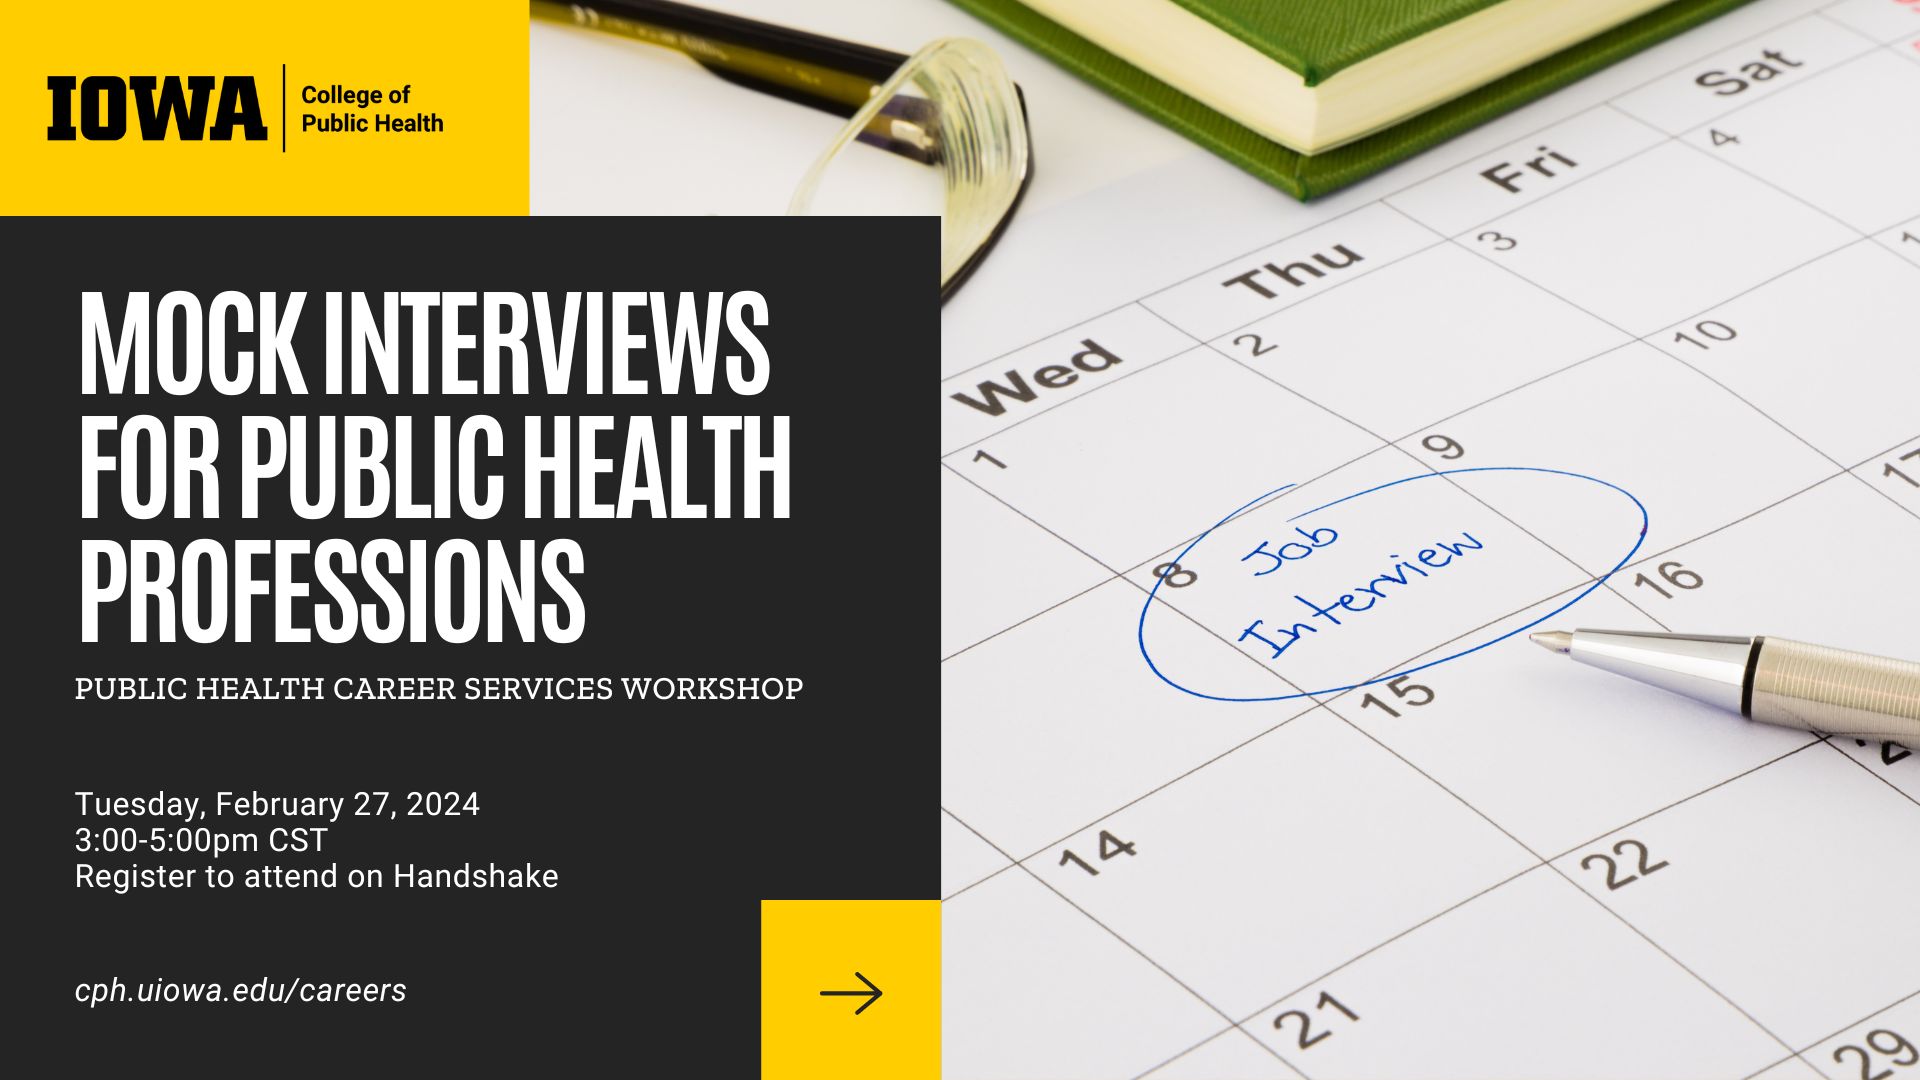 Mock interviews for public health professions, February 27 2024 3:00 to 5:00 pm